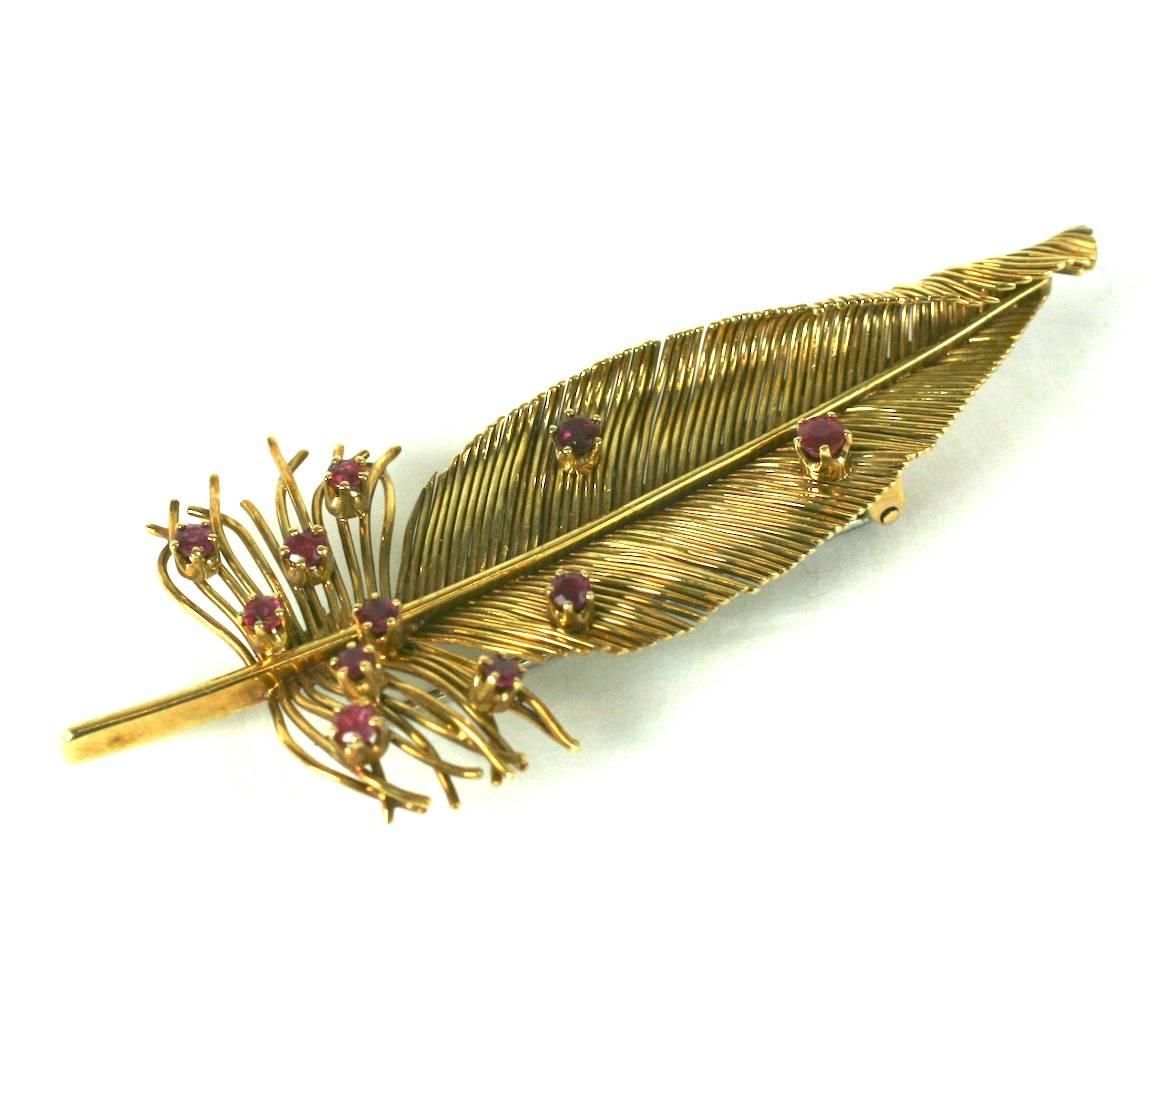 Elegant 18k Gold and Ruby Feather Brooch by Sanz, Spain. Lovely handmade brooch with dozens of delicate wires forming body of feather further accented with 11 prong set rubies. Lovely naturalistic furled design. 2.75